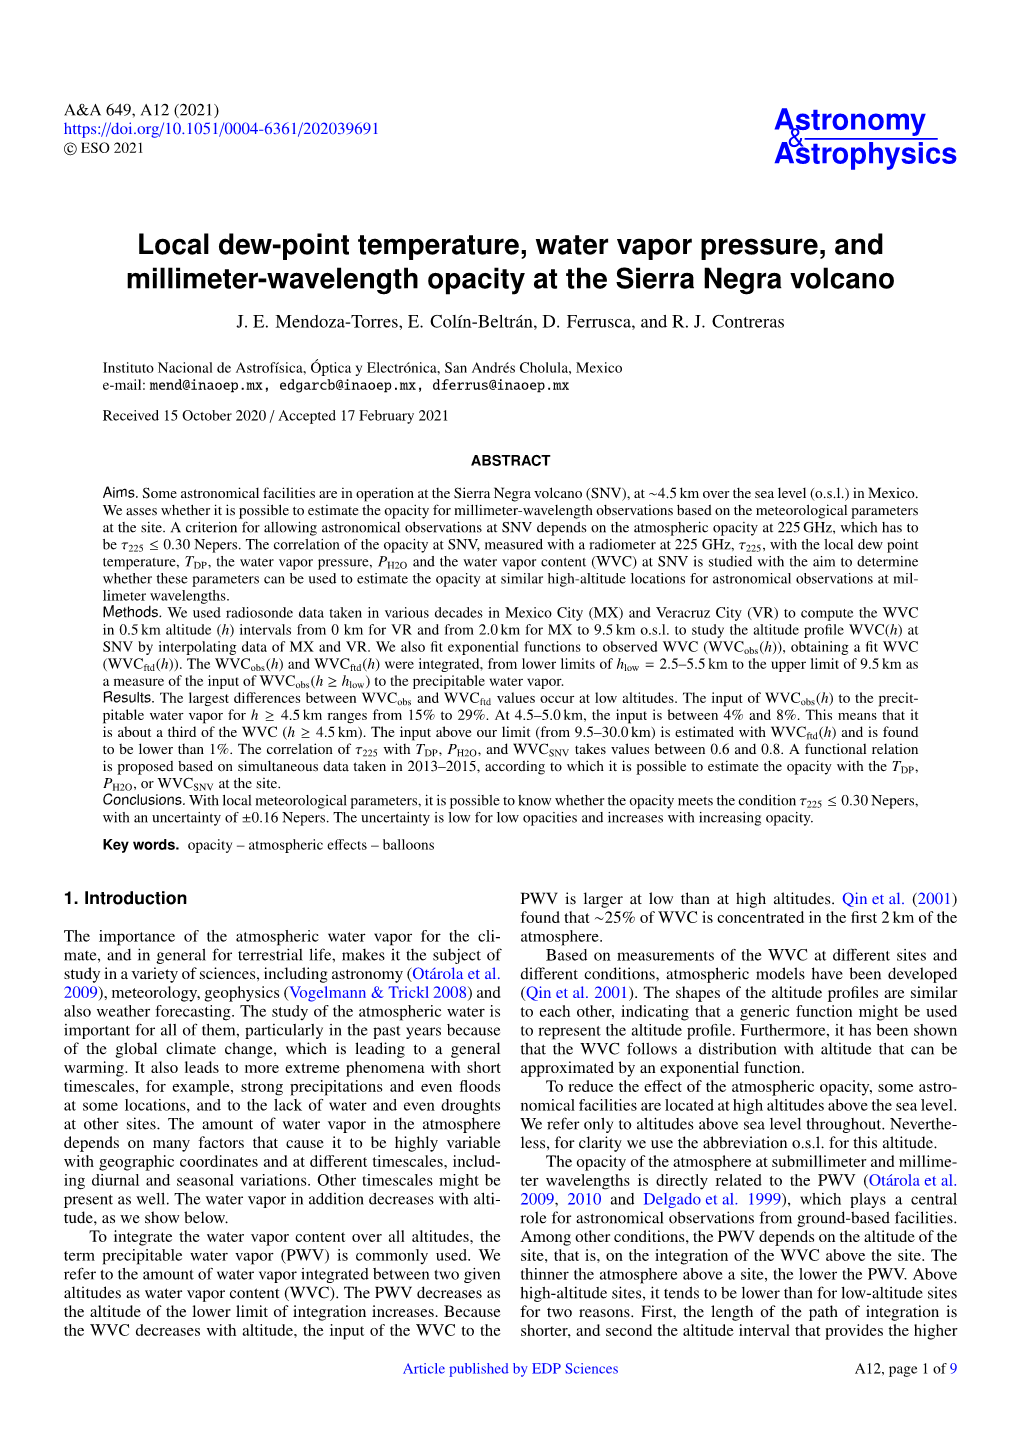 Local Dew-Point Temperature, Water Vapor Pressure, and Millimeter-Wavelength Opacity at the Sierra Negra Volcano J